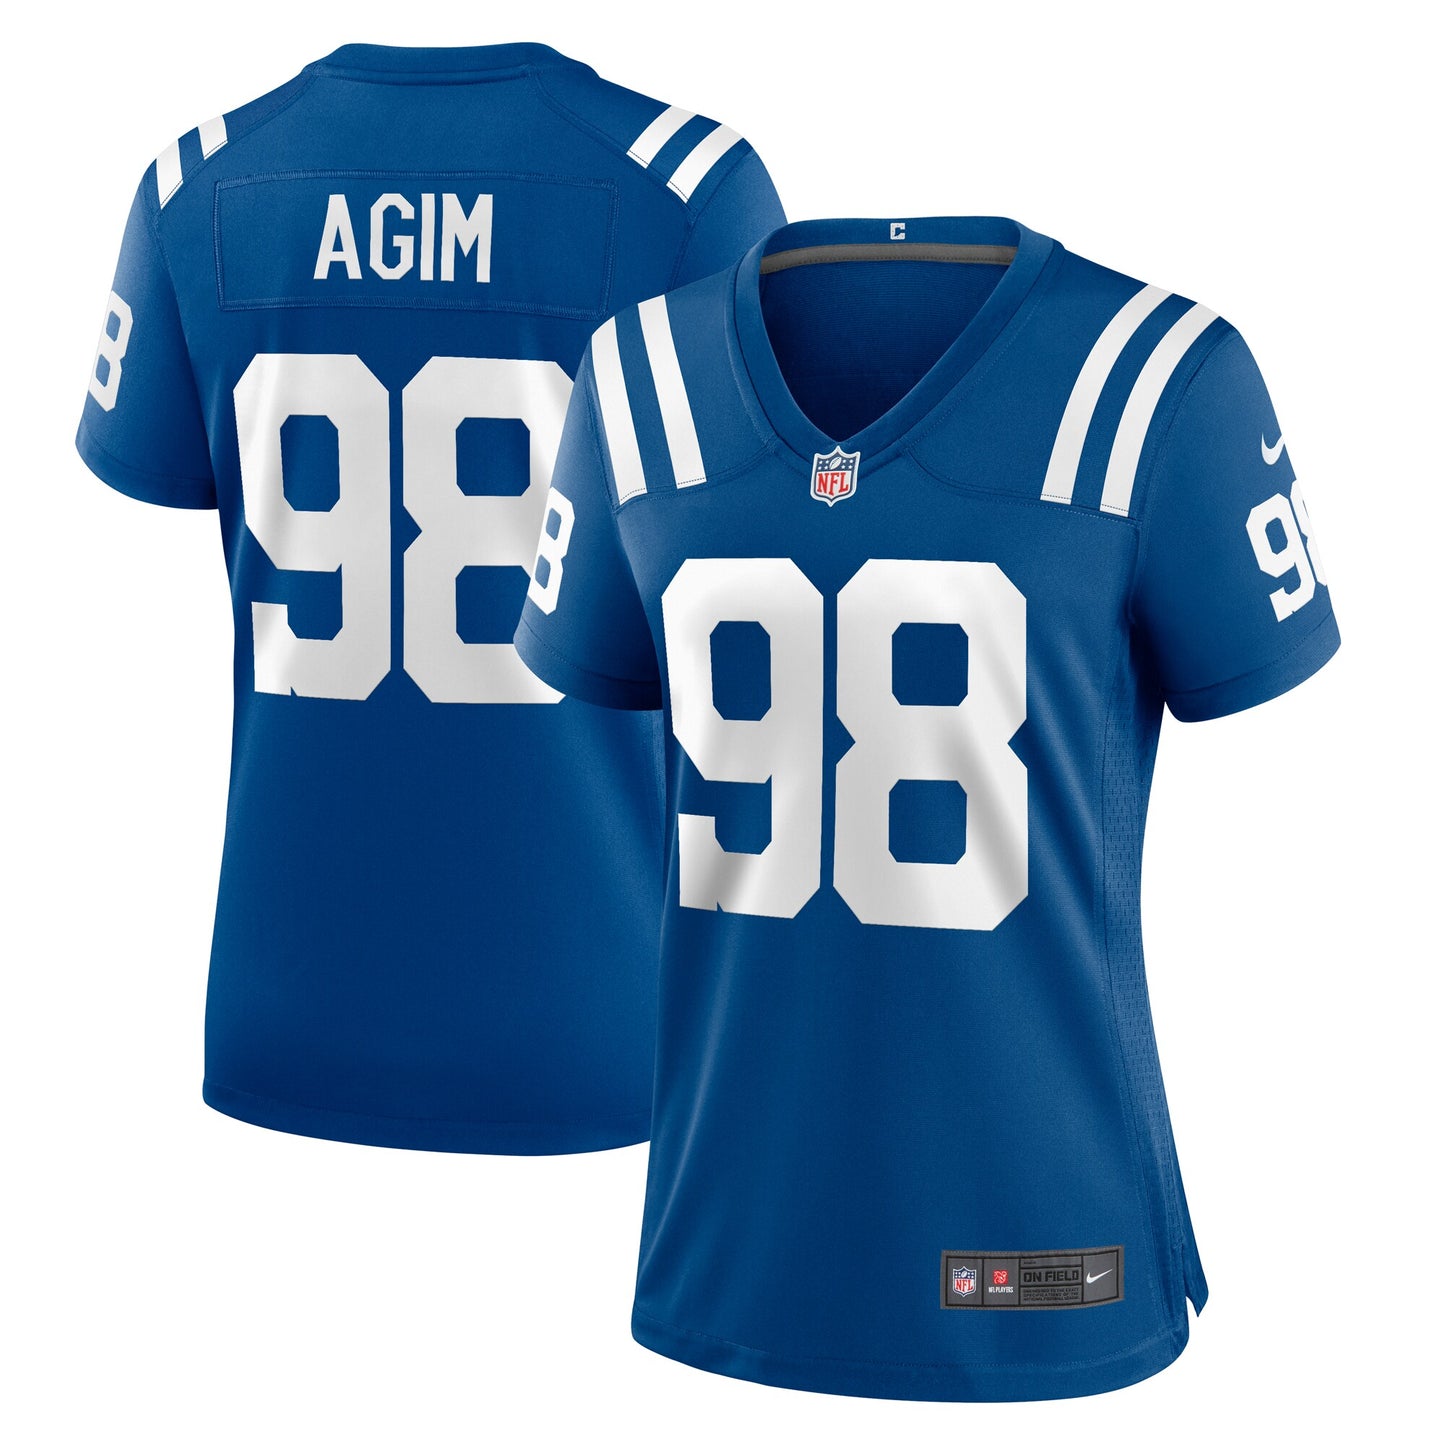 McTelvin Agim Indianapolis Colts Nike Women's Team Game Jersey - Royal